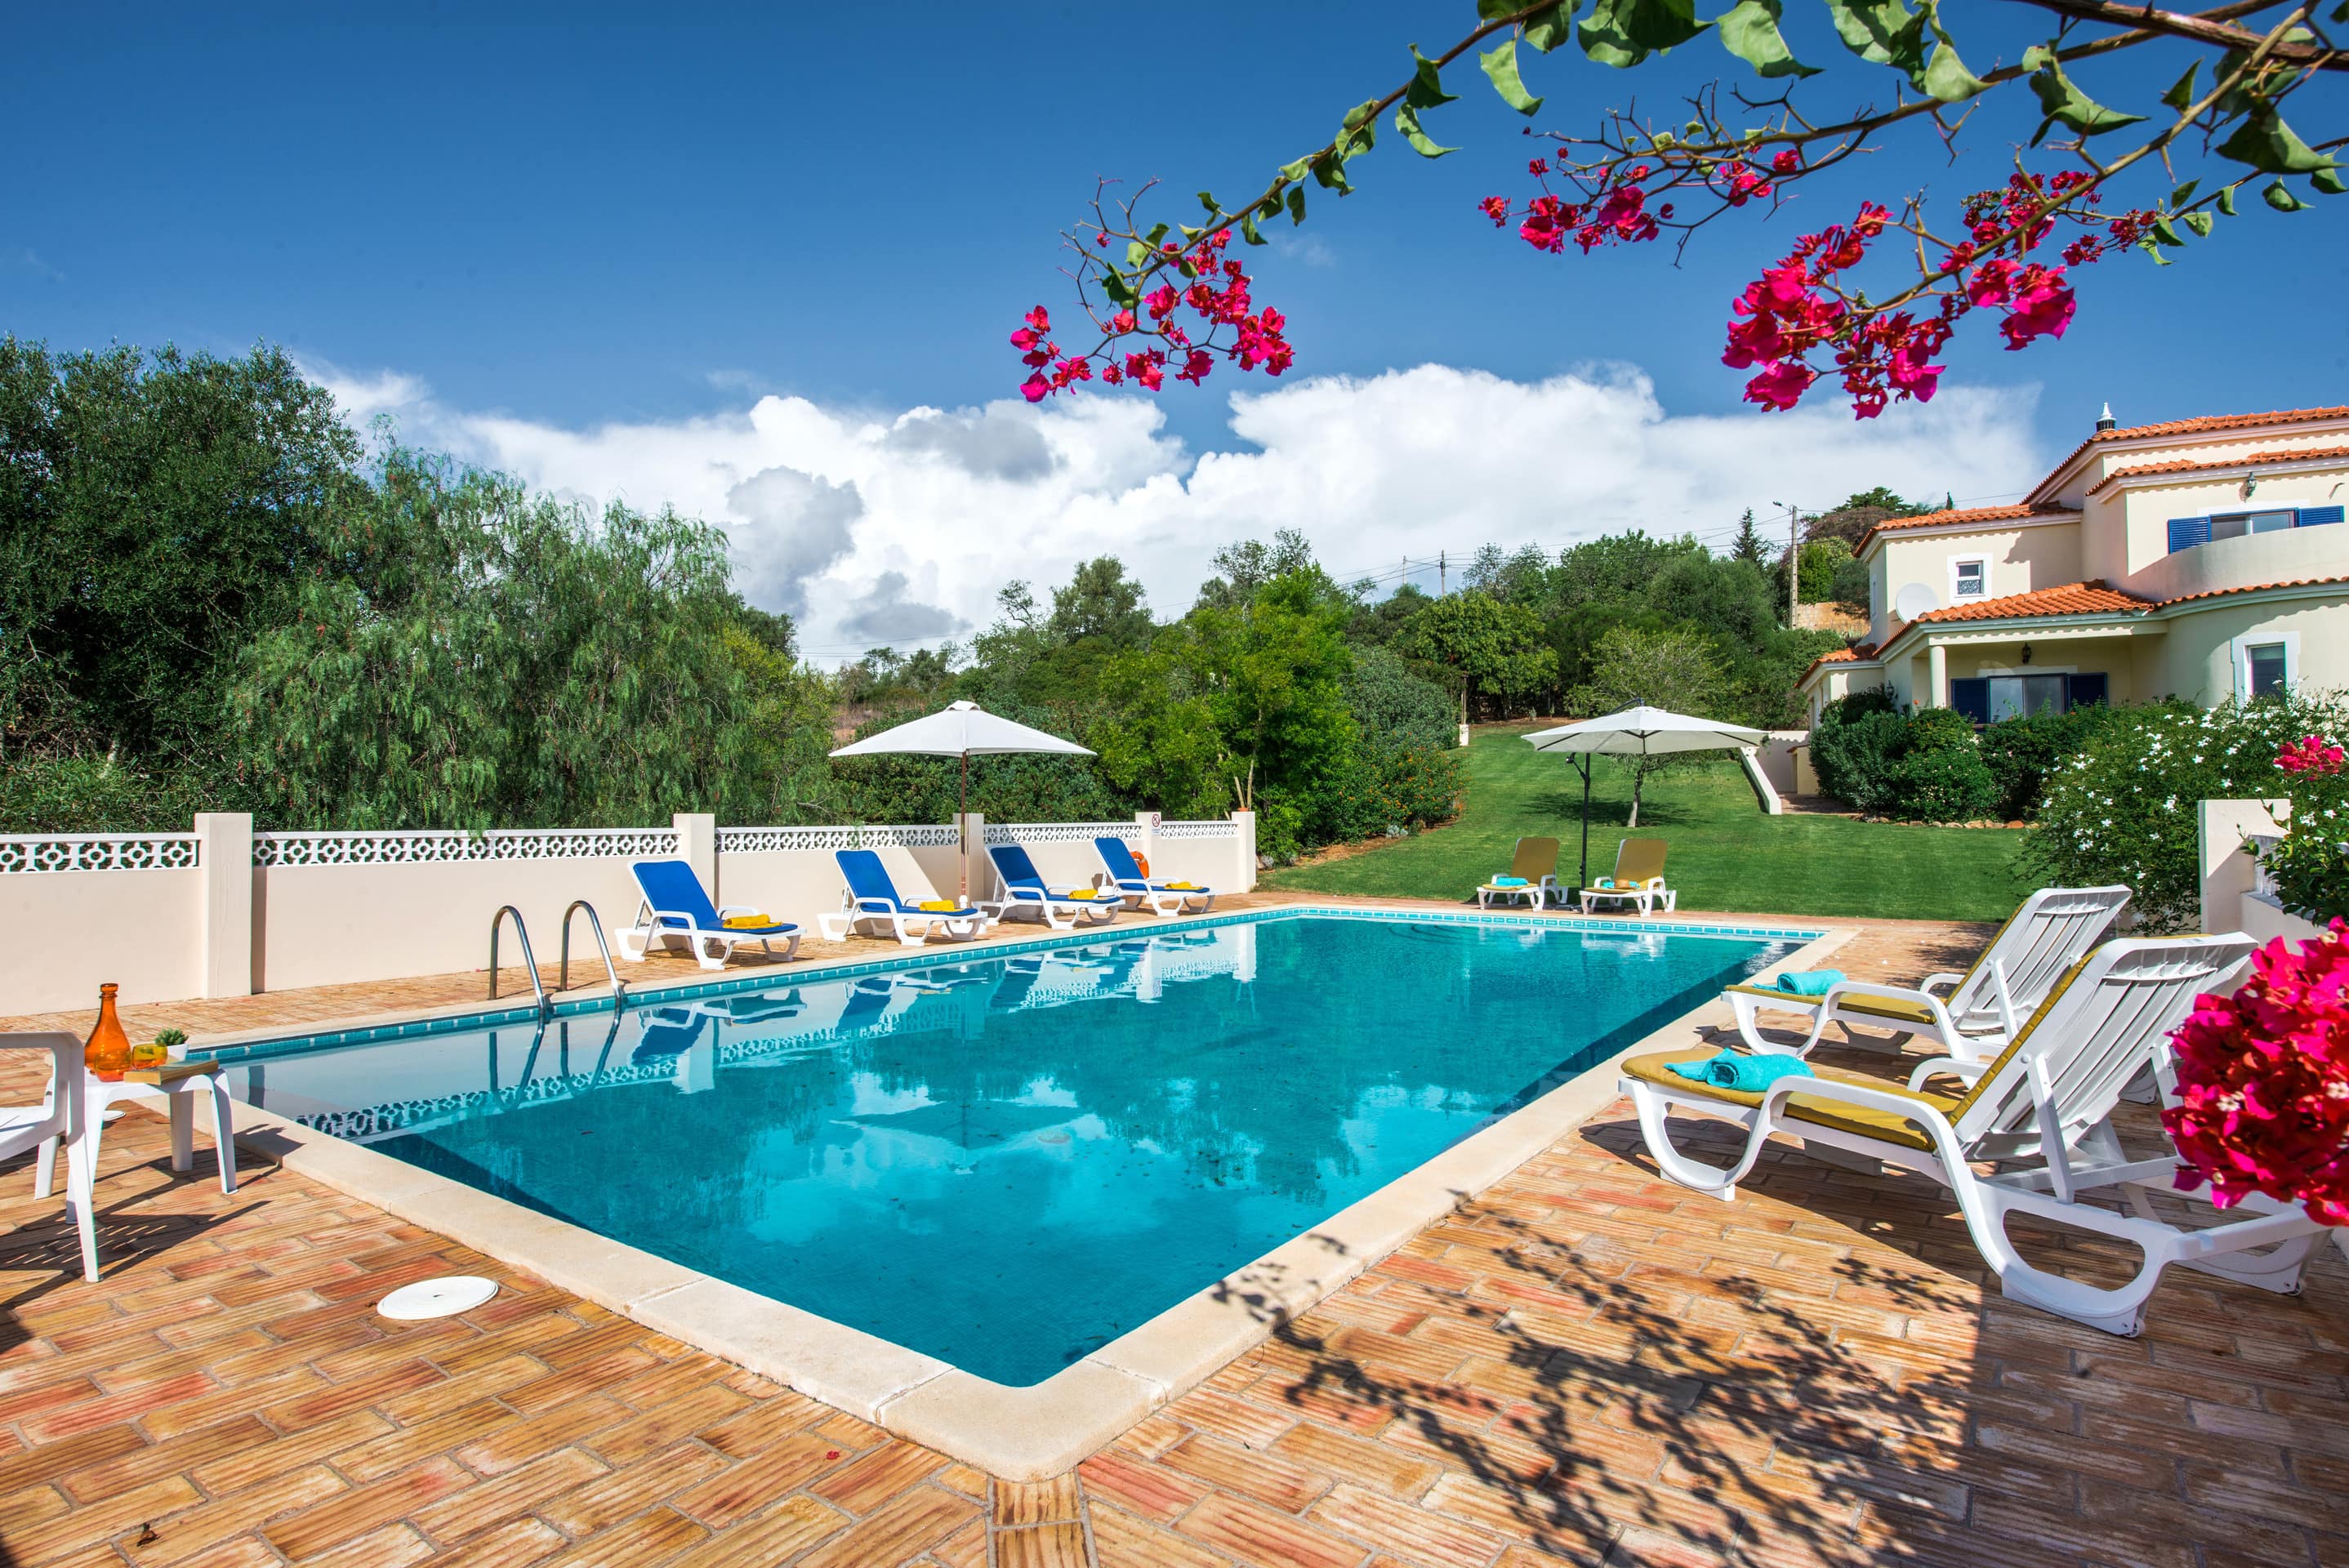 Affordable private villas with pool in Southern Europe